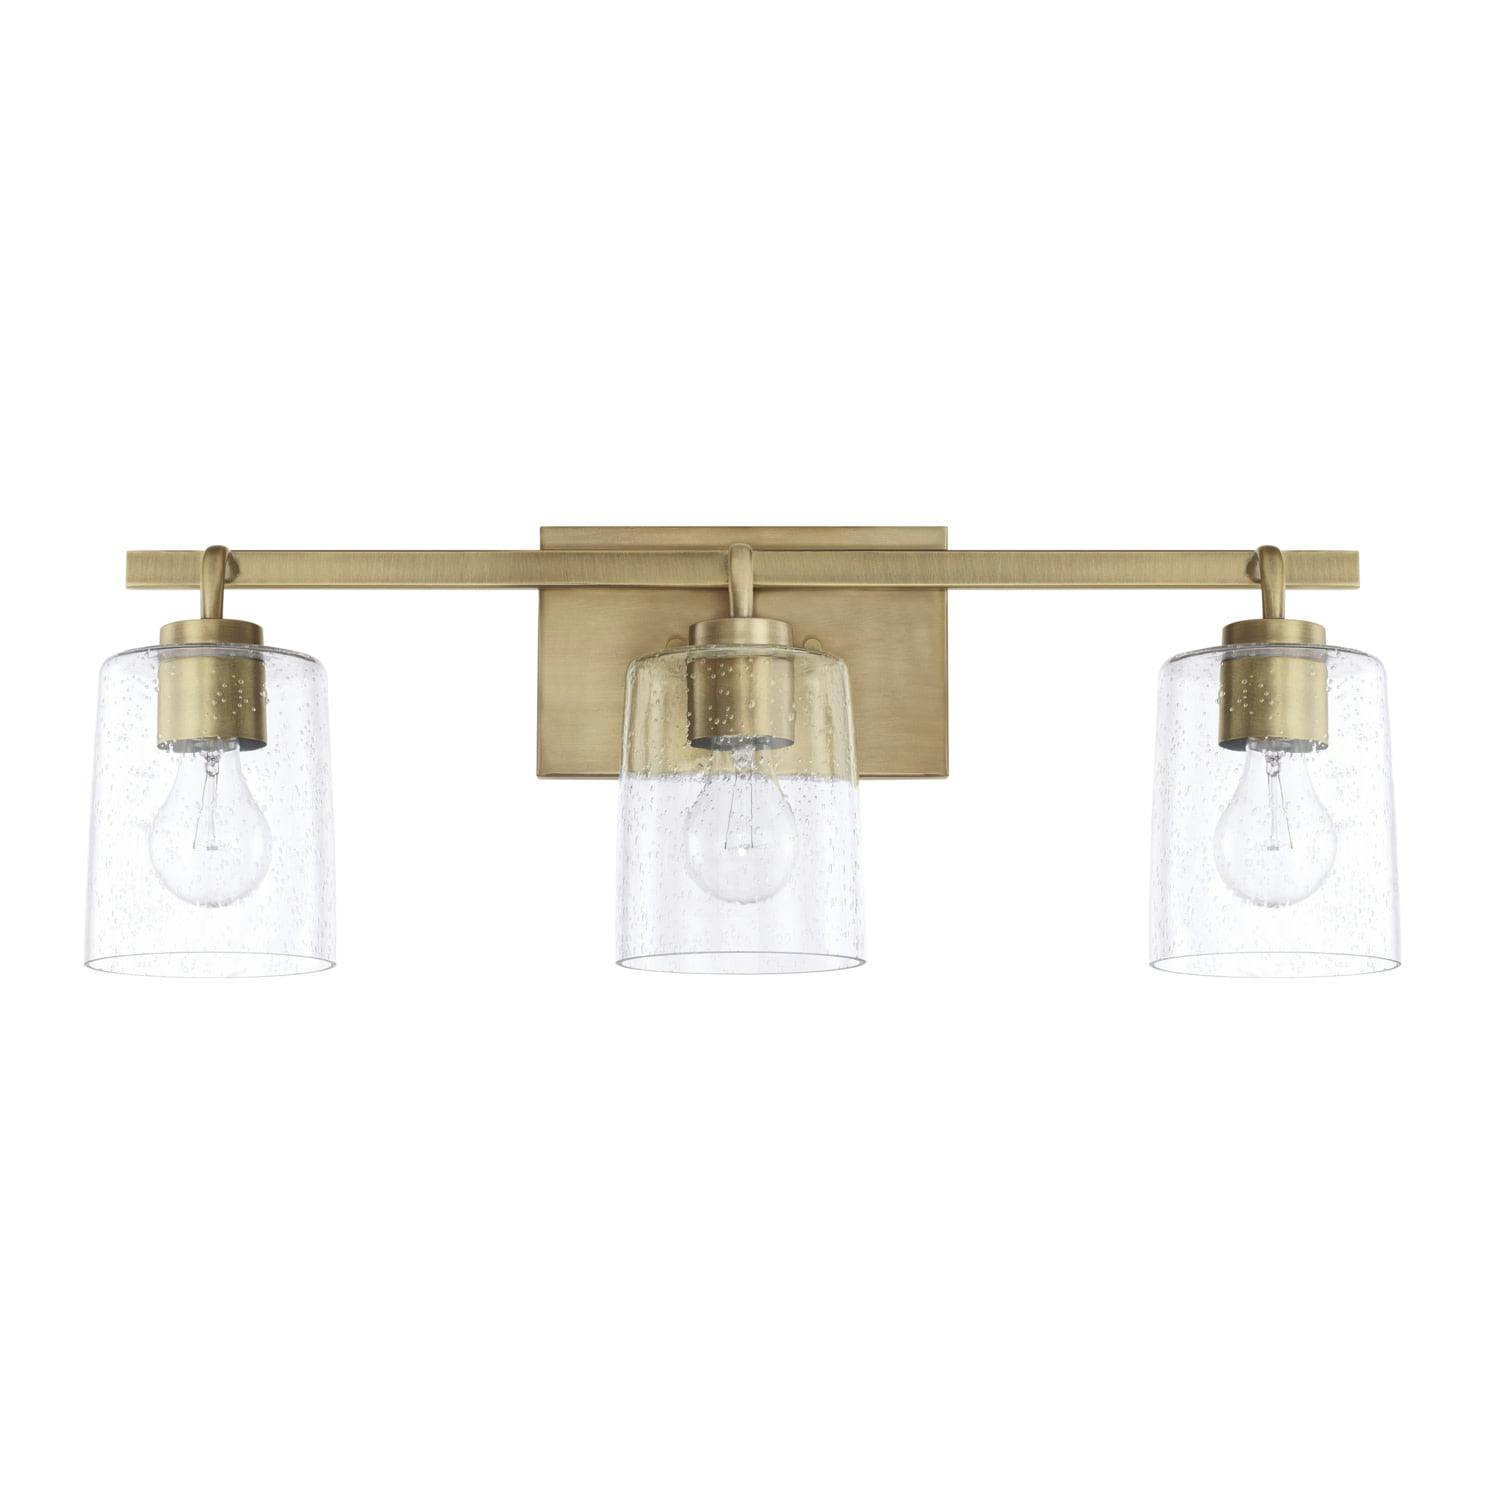 Elegant Greyson 3-Light Vanity in Aged Brass with Seeded Glass Shades